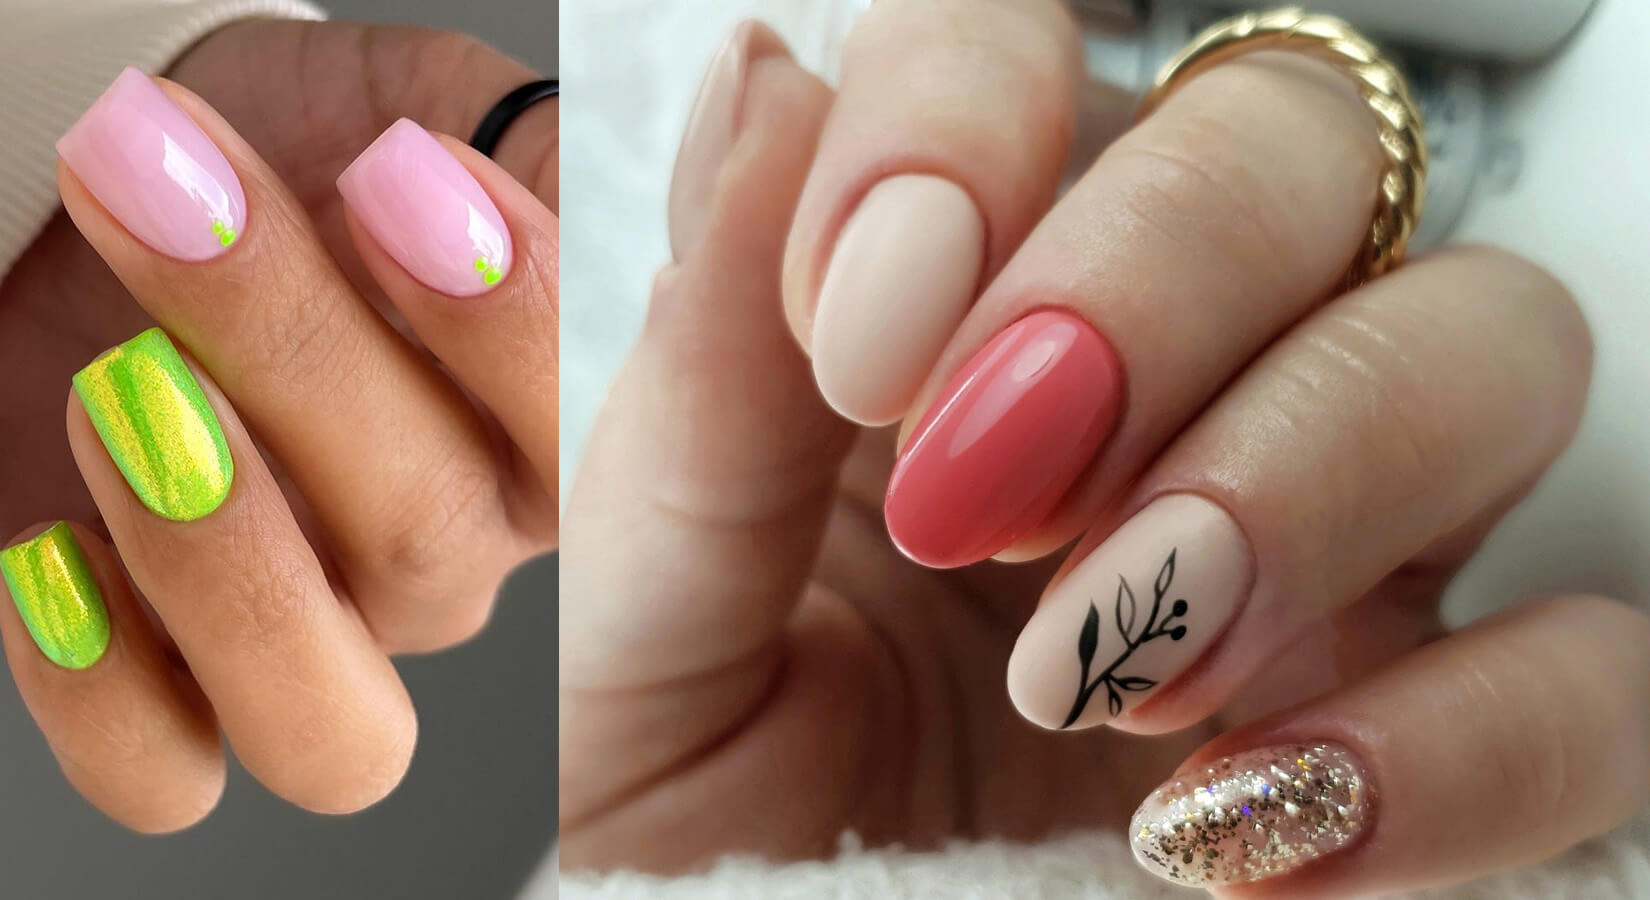 20 fabulous short coffin nails ideas to try out in Spring 